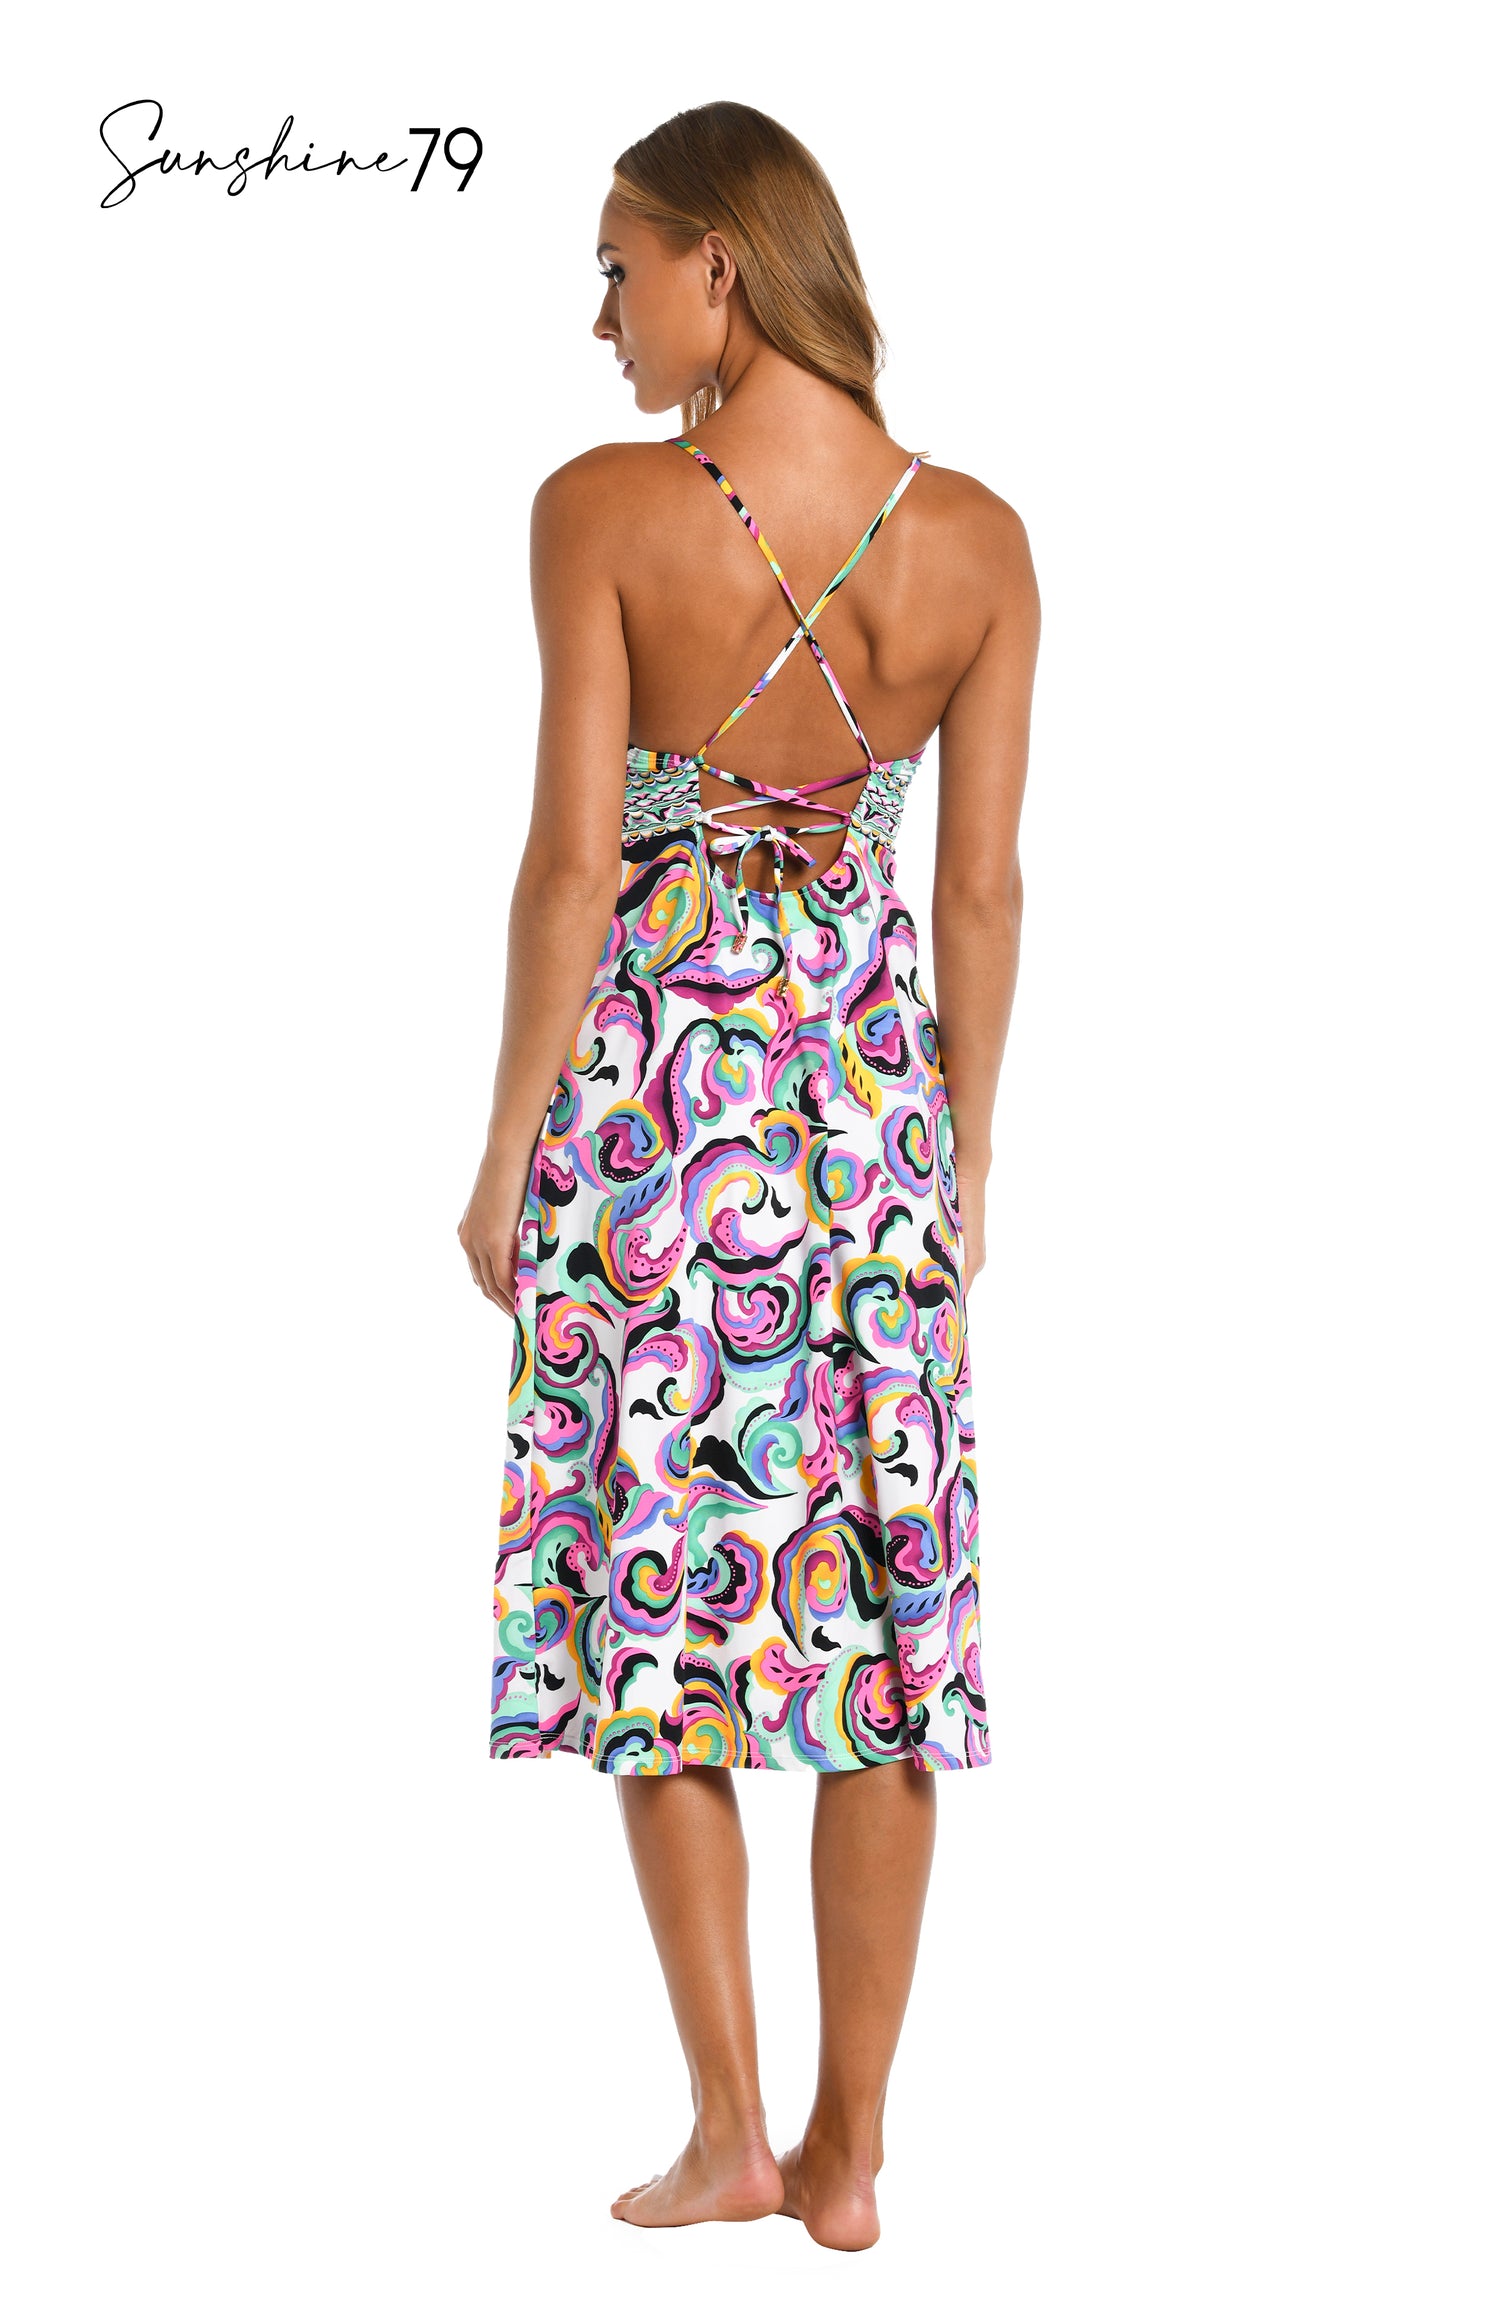 Model is wearing a multicolored swirl printed midi dress cover up from our Sunshine 79 brand.